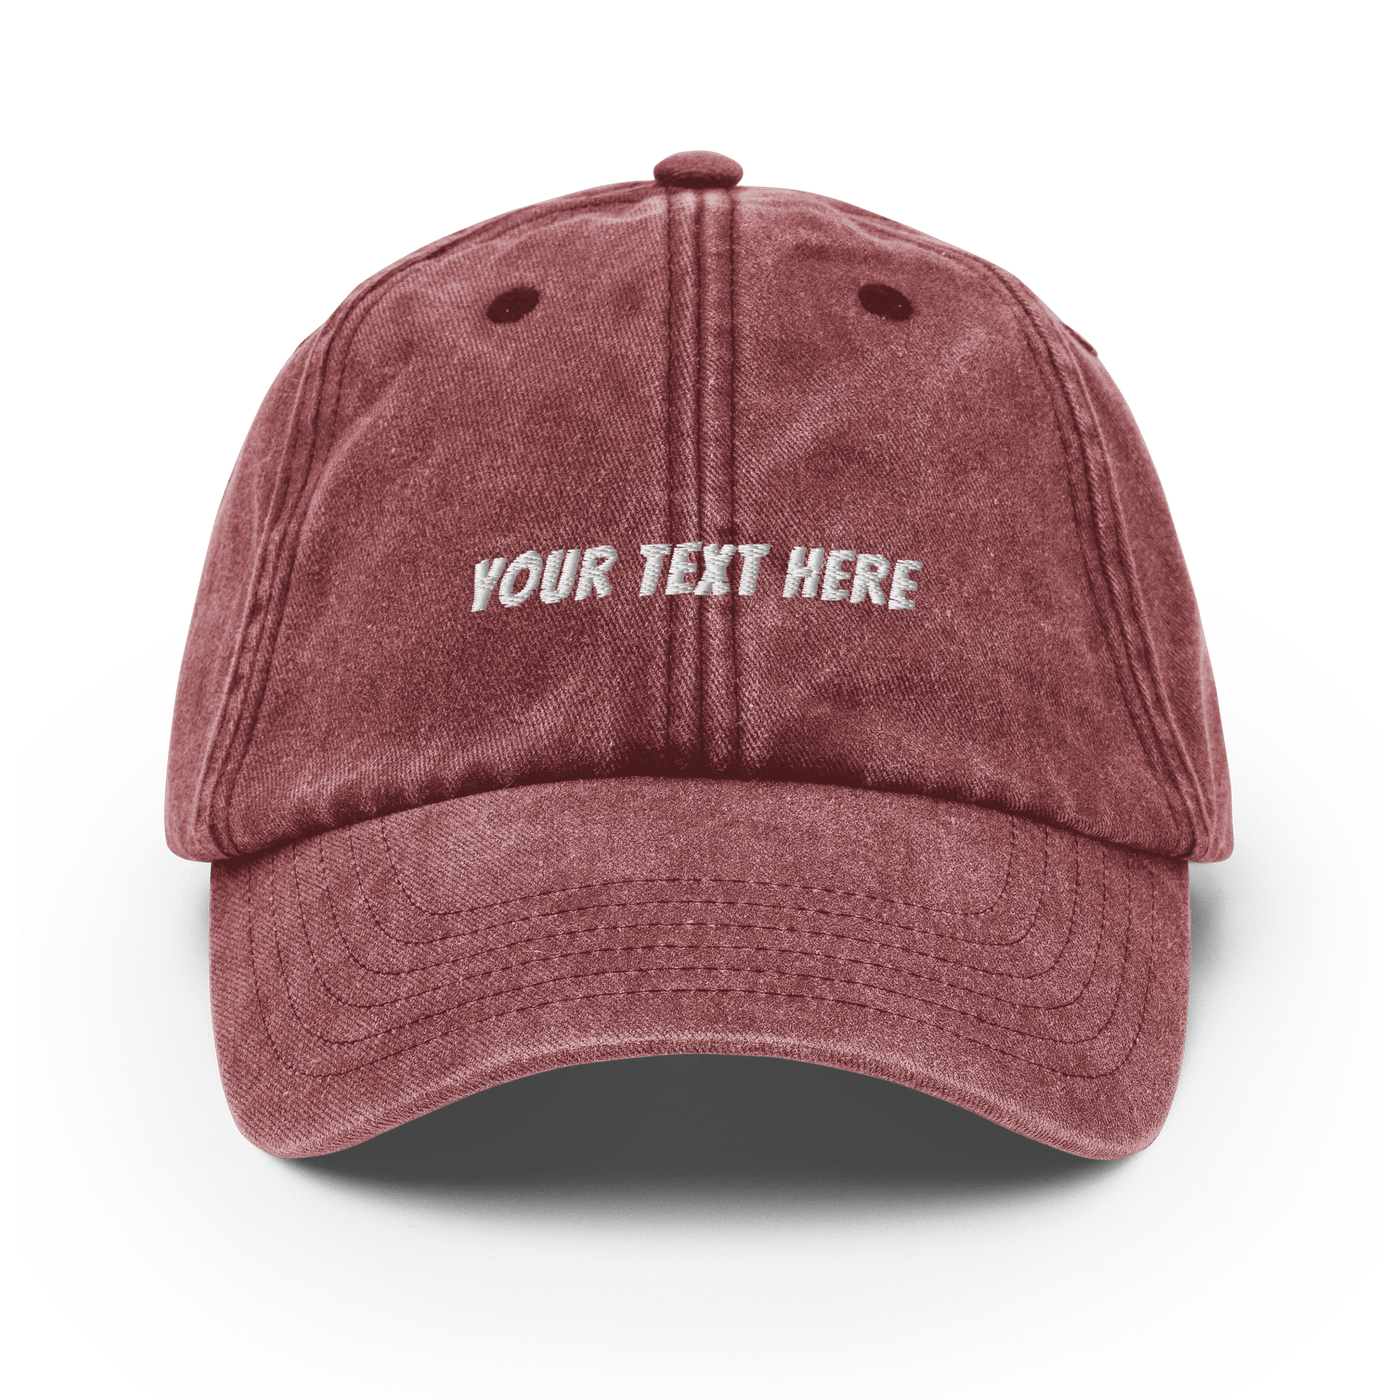 Customize Your own Vintage Hat - Banger Font - Vintage Red - - Just Another Cap Store